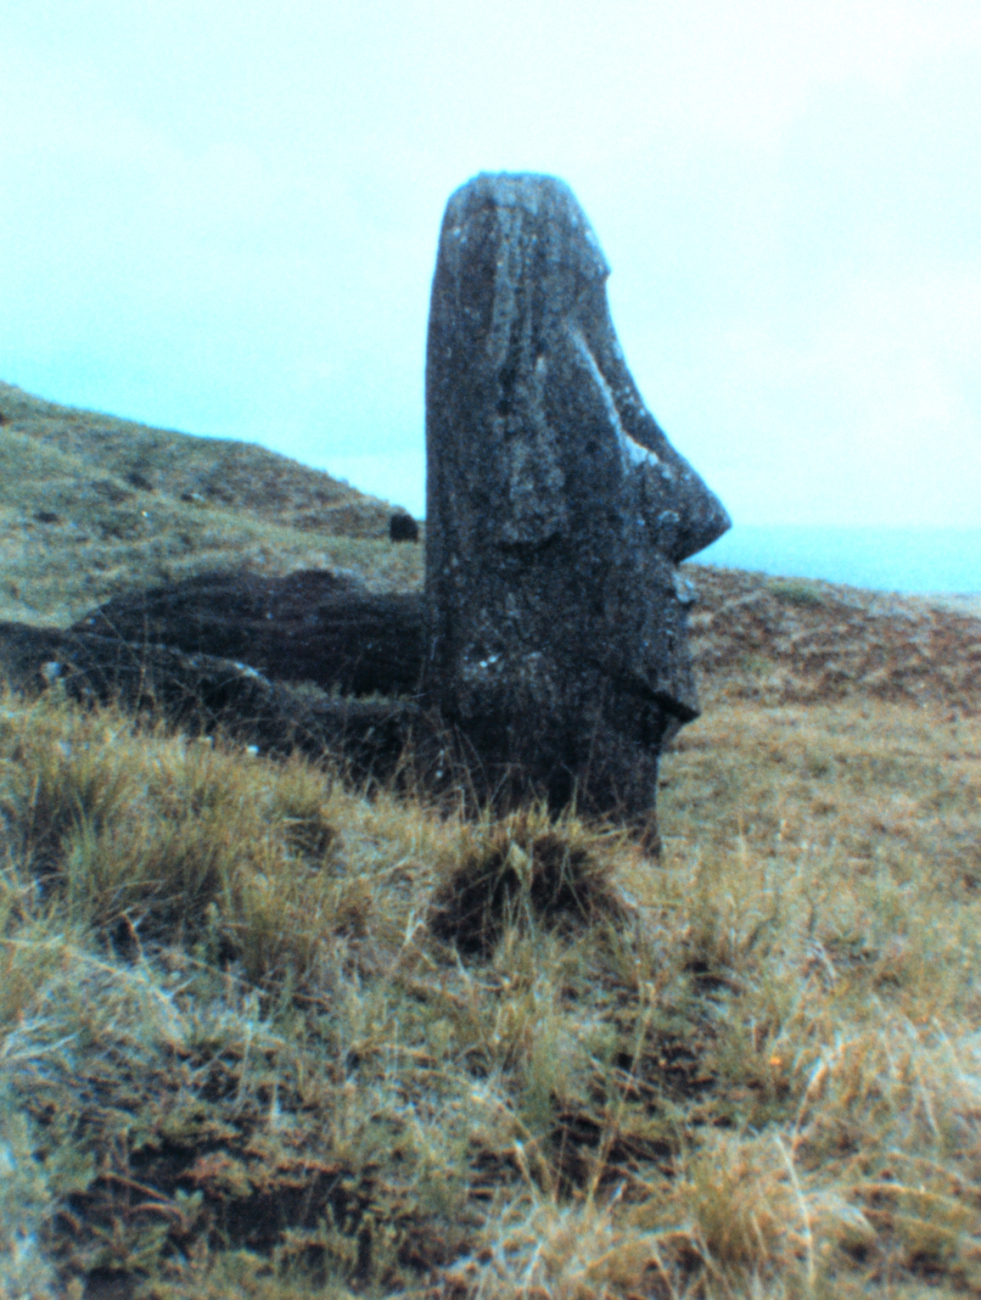 The stone quarry at Easter Island